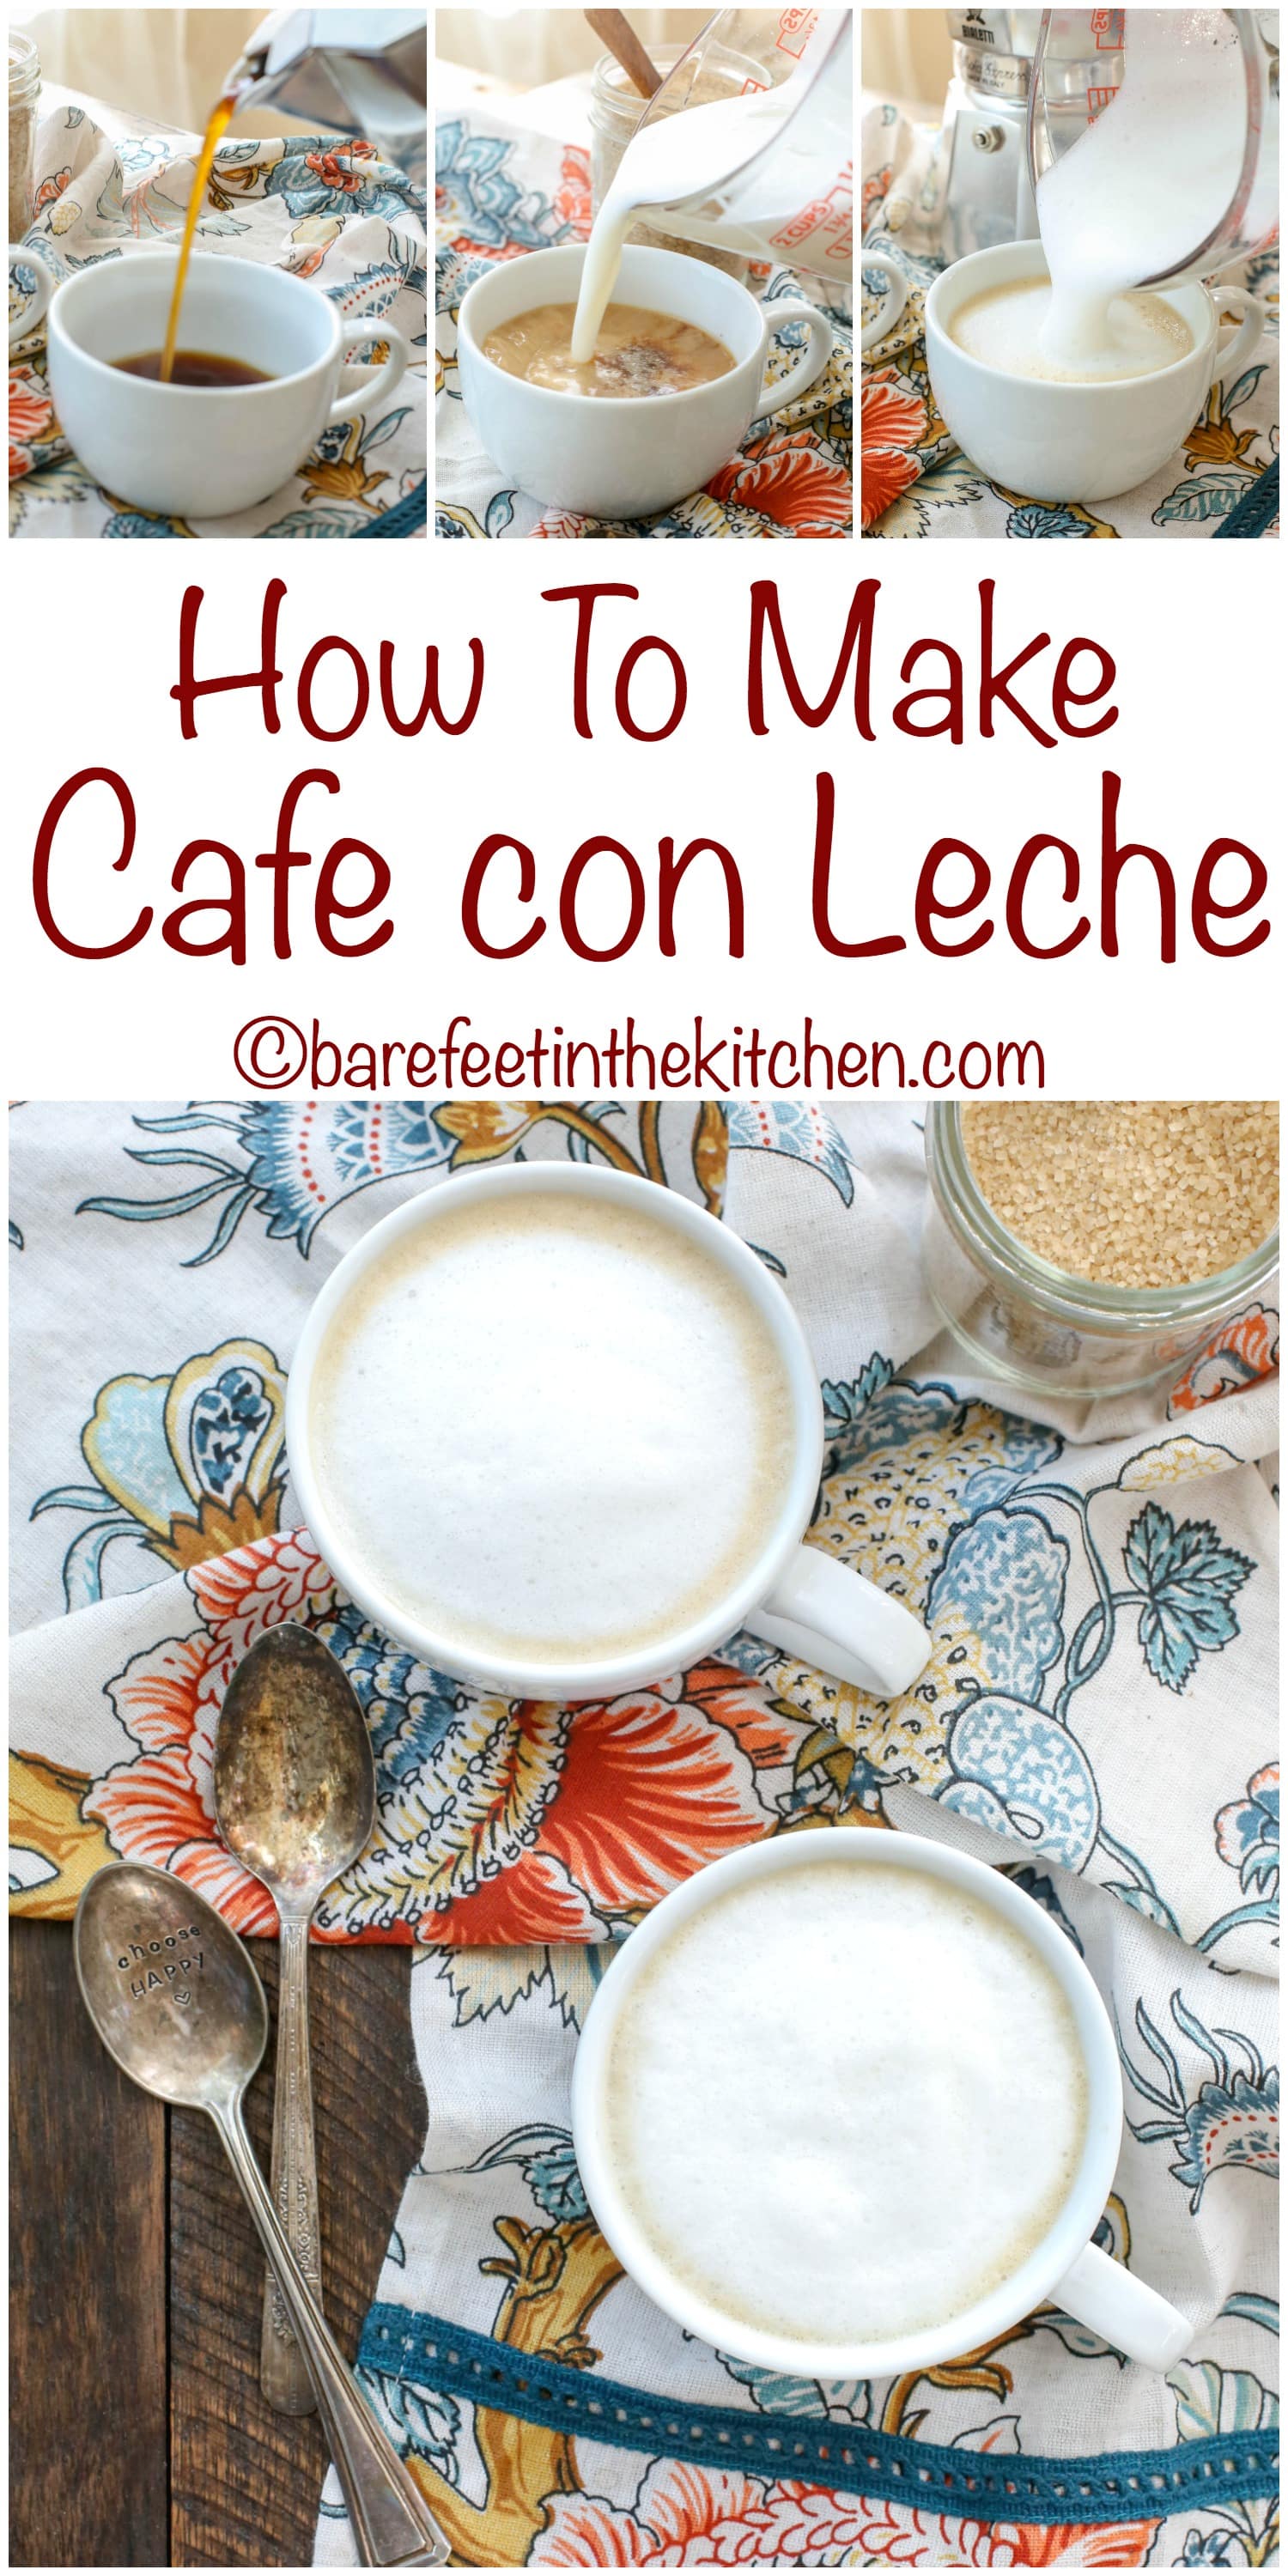 How to Make: Spanish-Style Coffee at Home – Sincerely, Spain